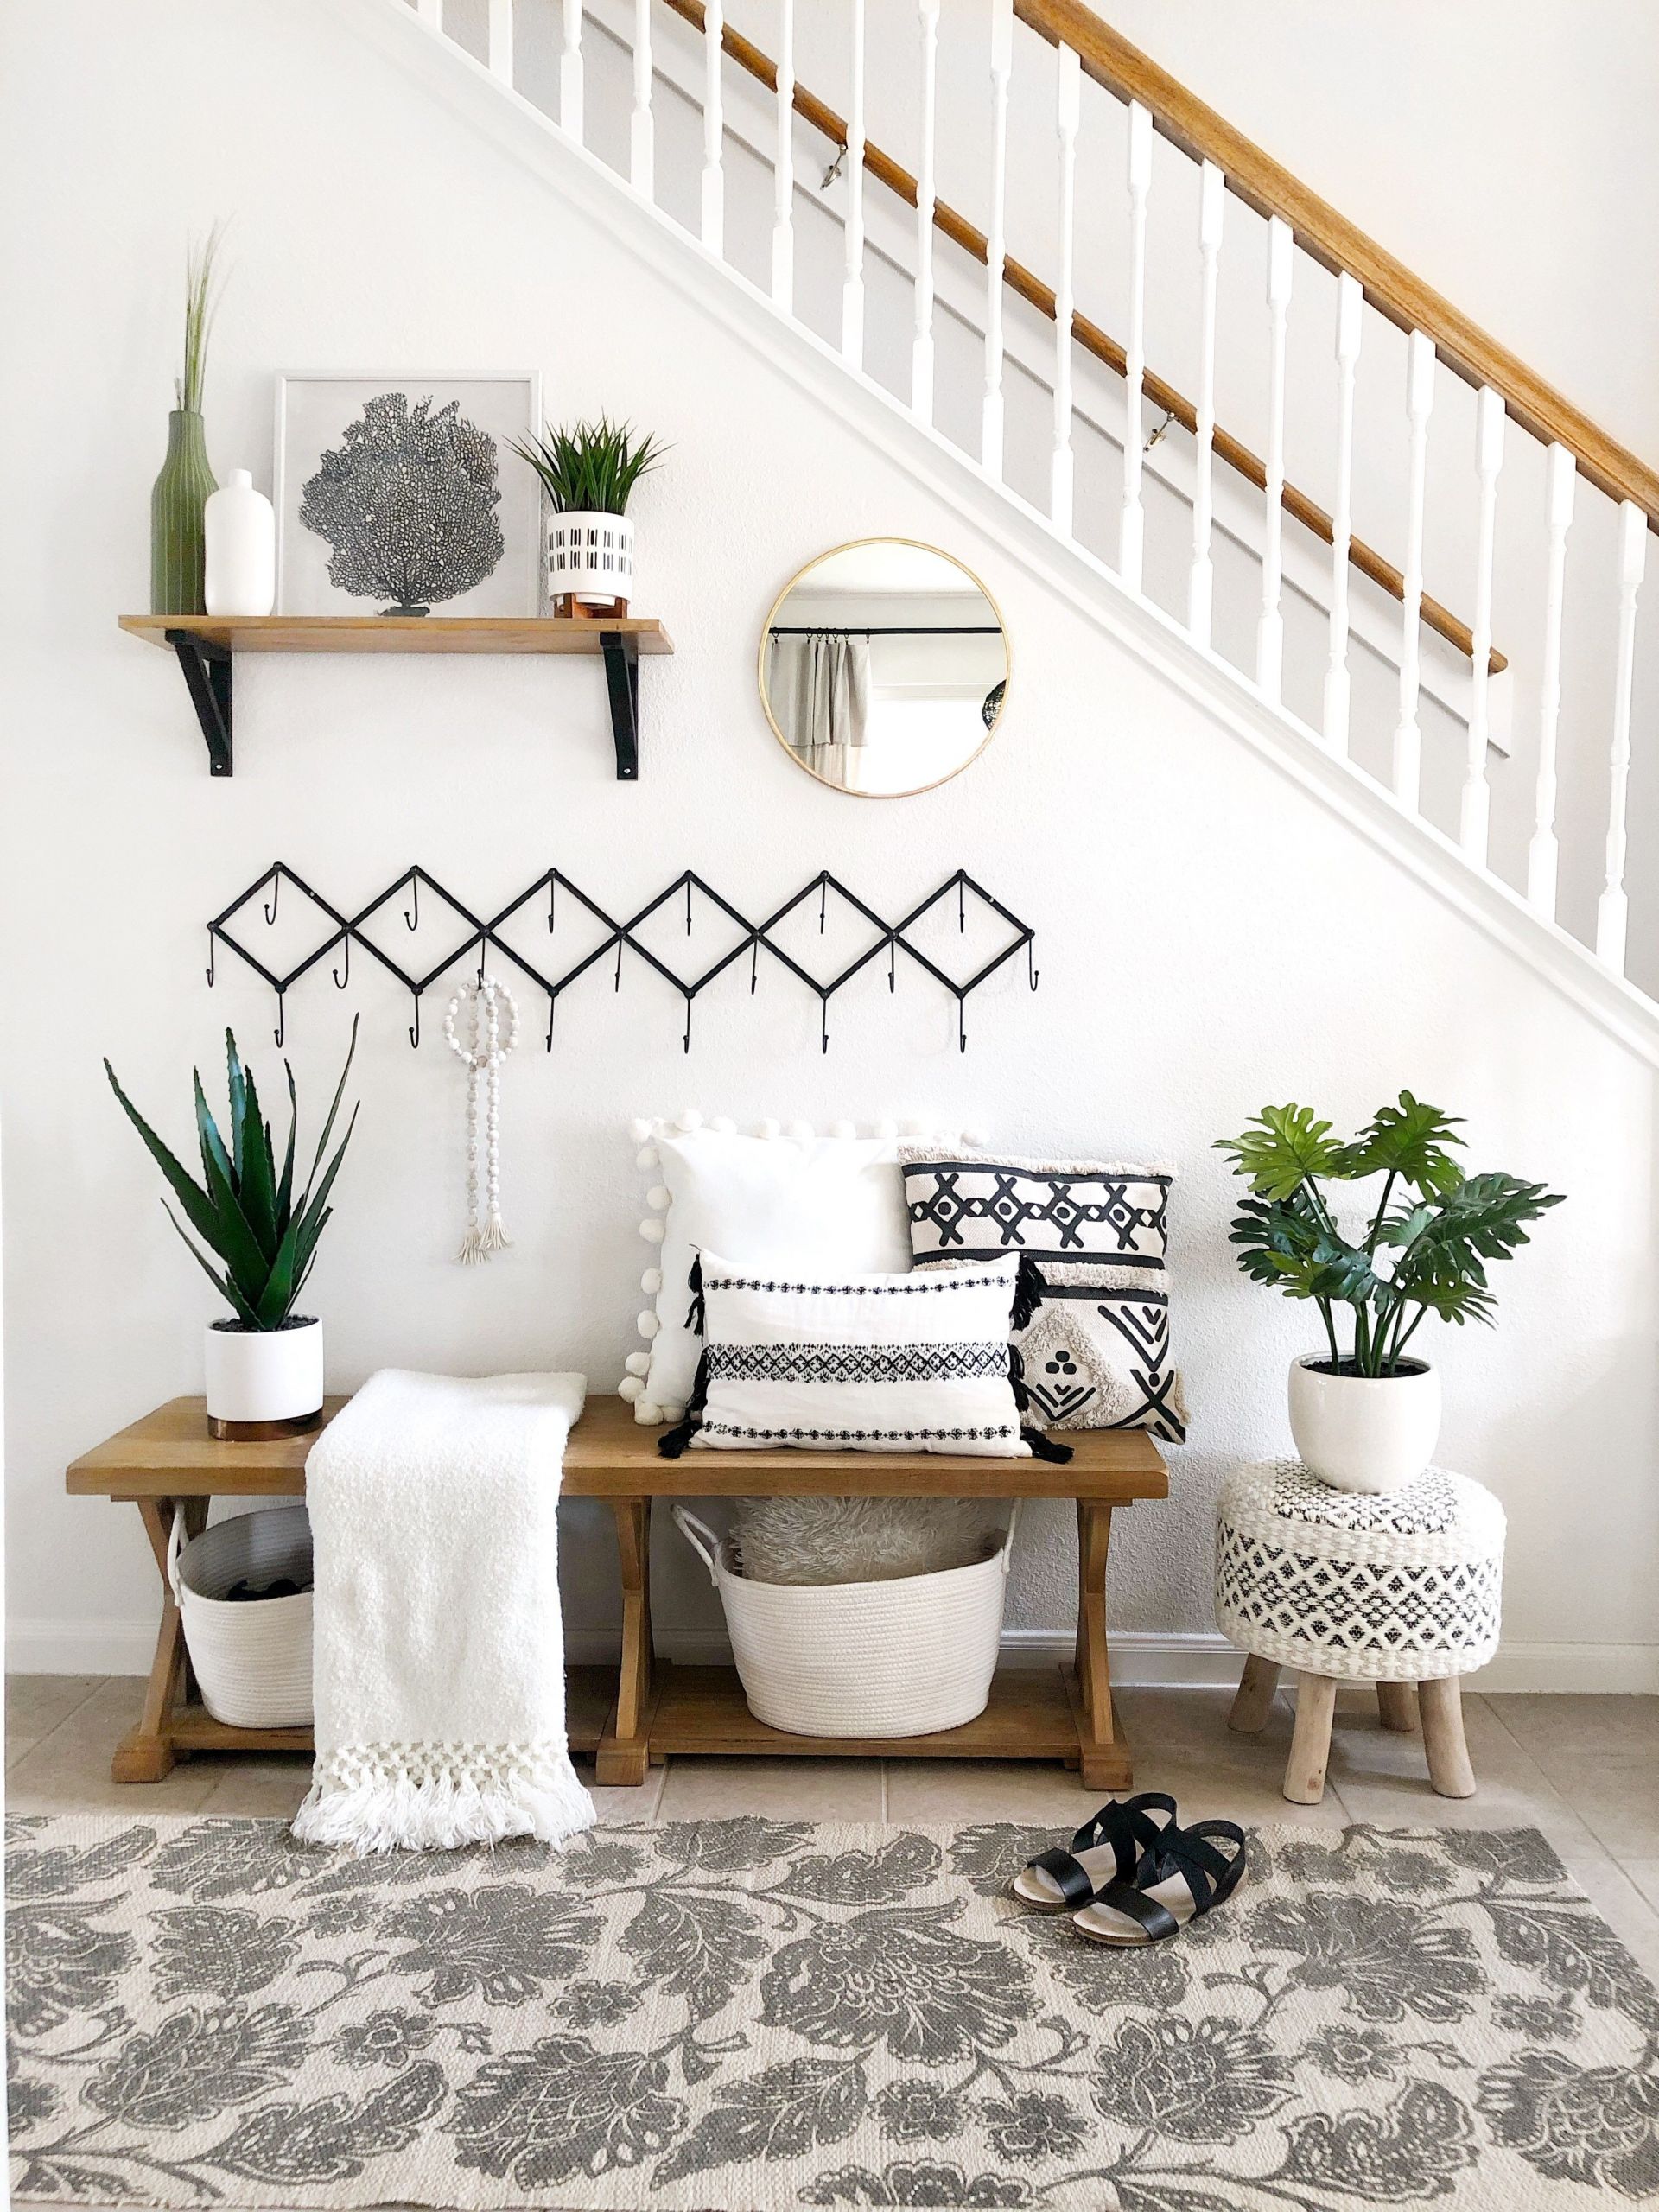 Small Benches For Living Room
 Entryway Goals My Houston House styled her entryway with